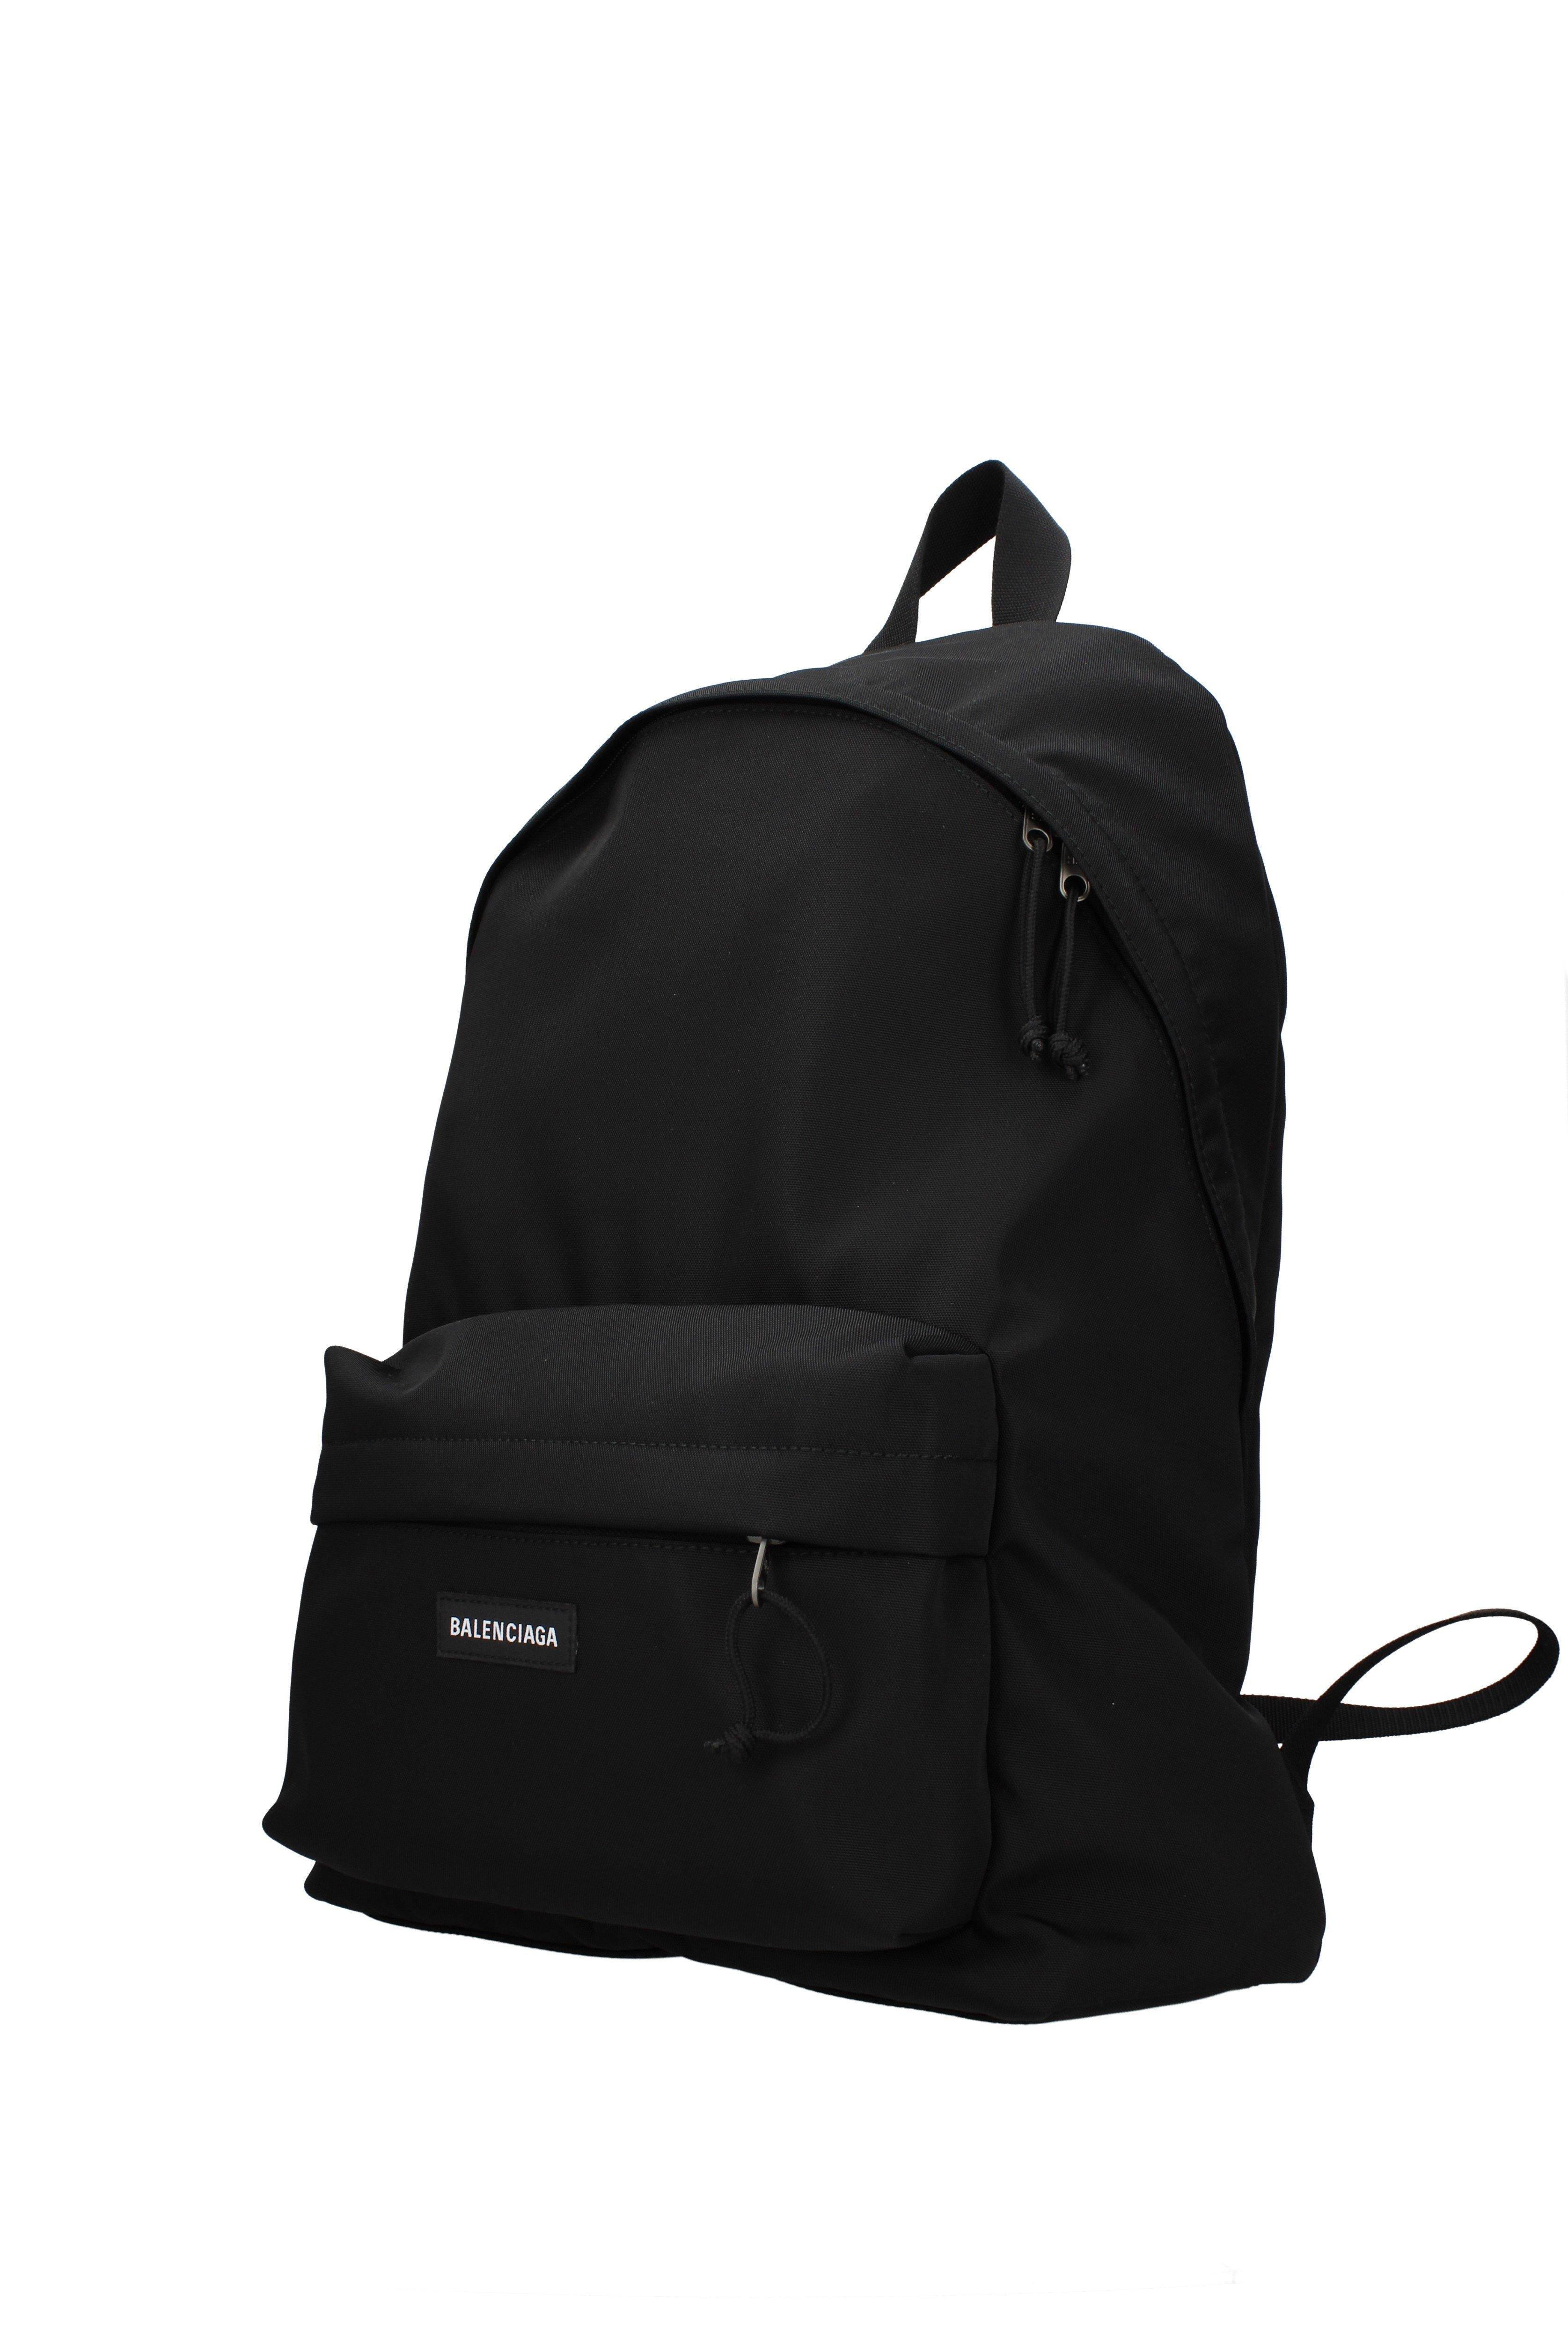 Balenciaga Backpack And Bumbags Men Black for Men - Lyst